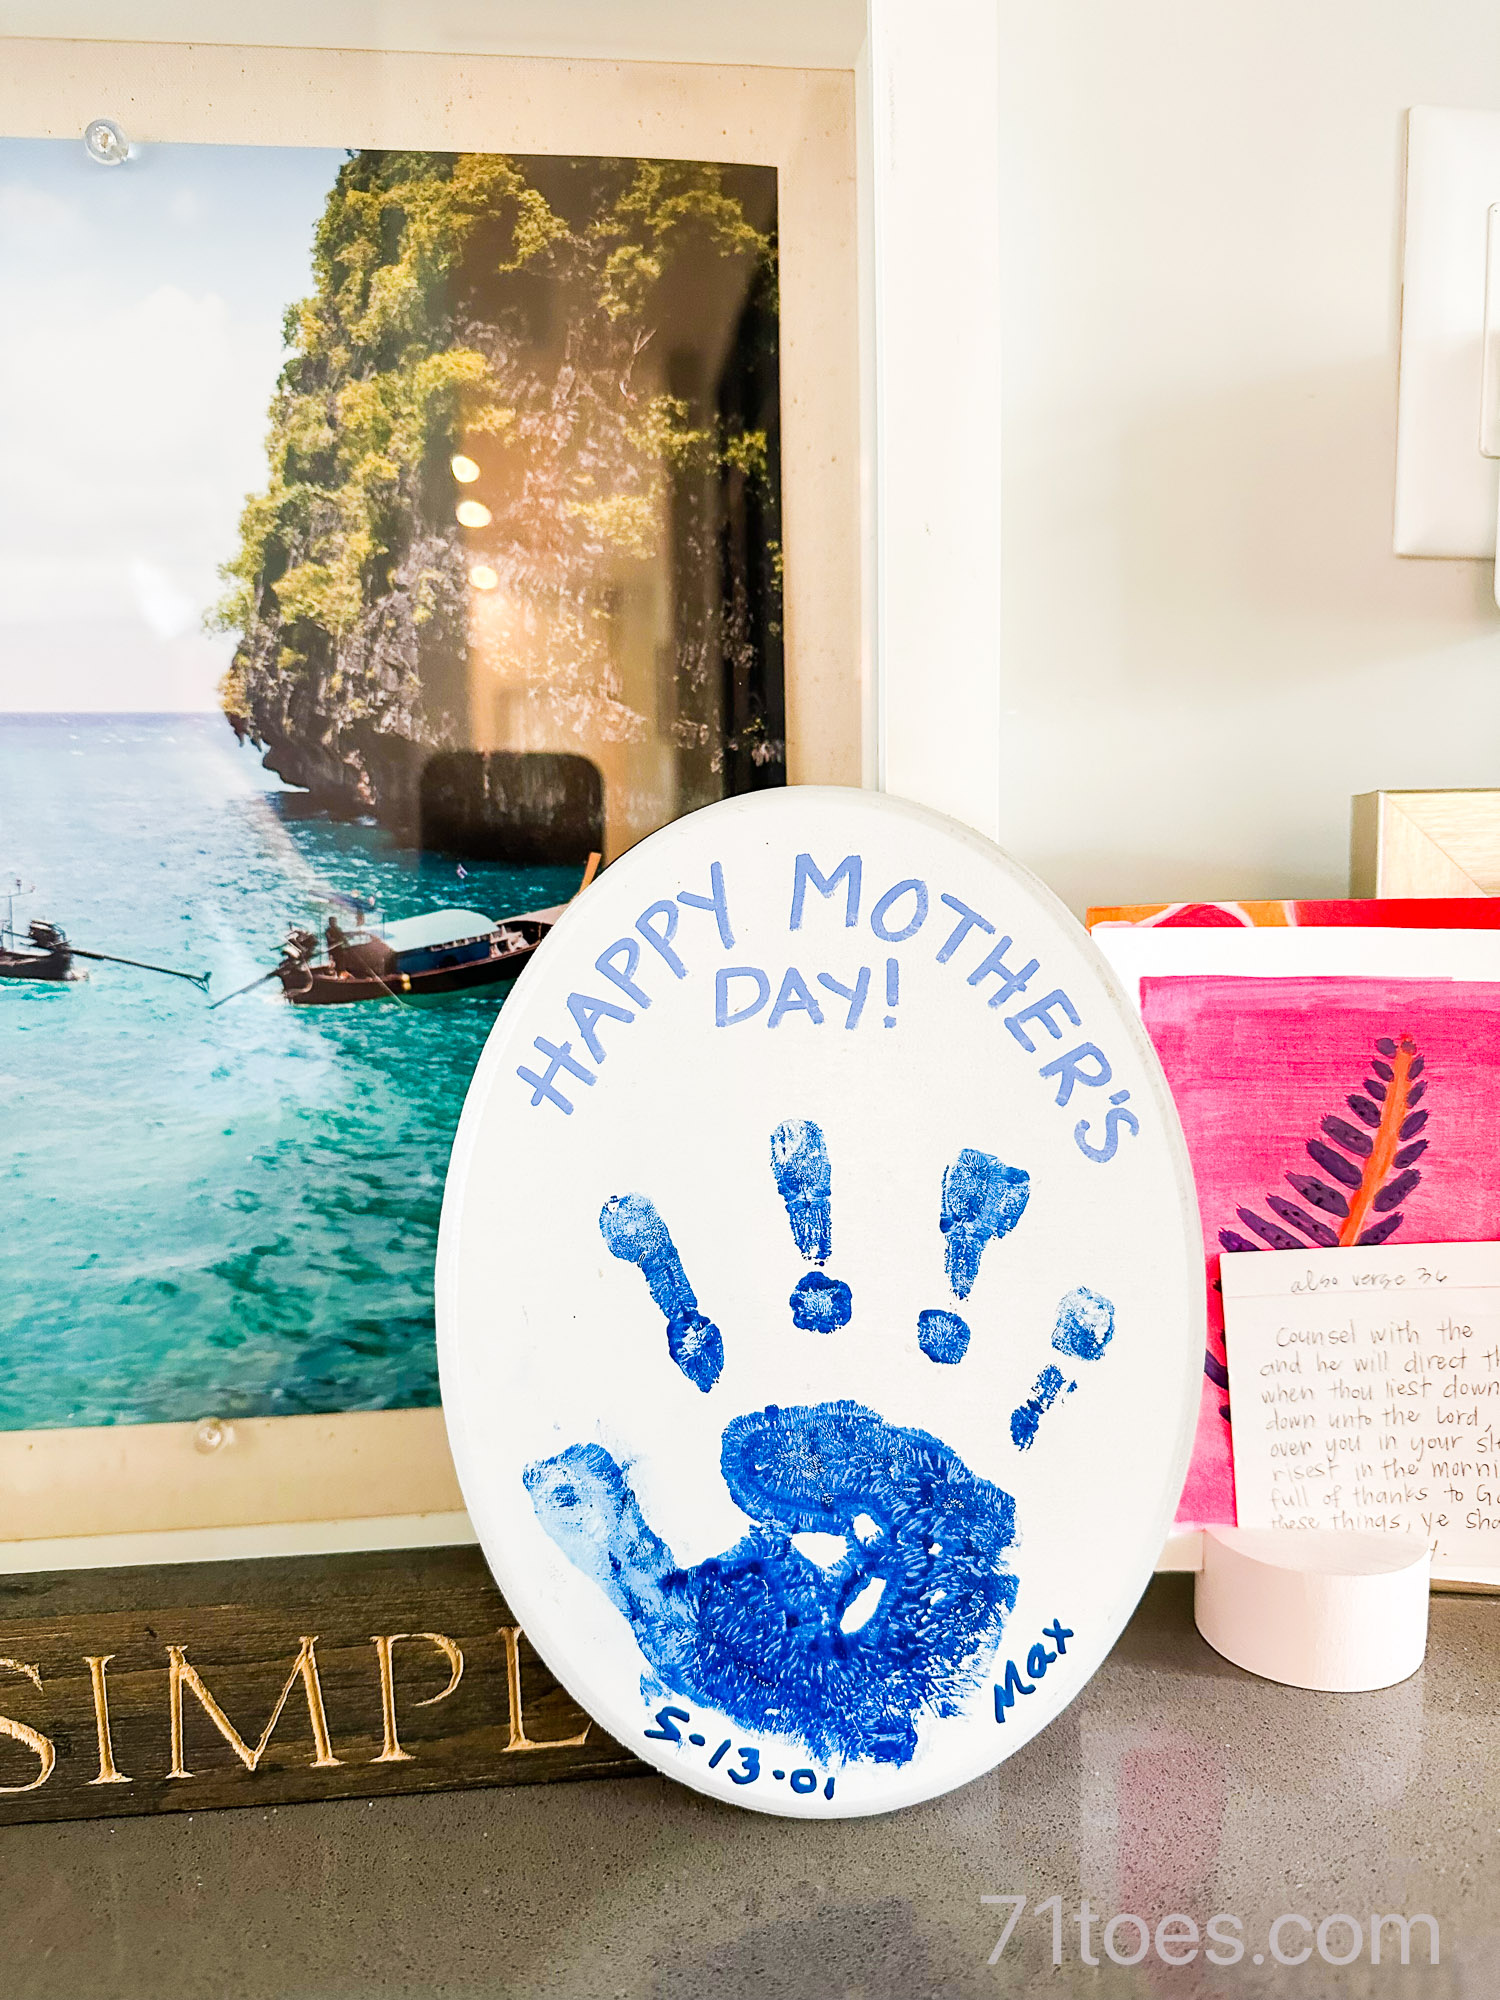 Max's handprint as a sentimental Mother's Day gift